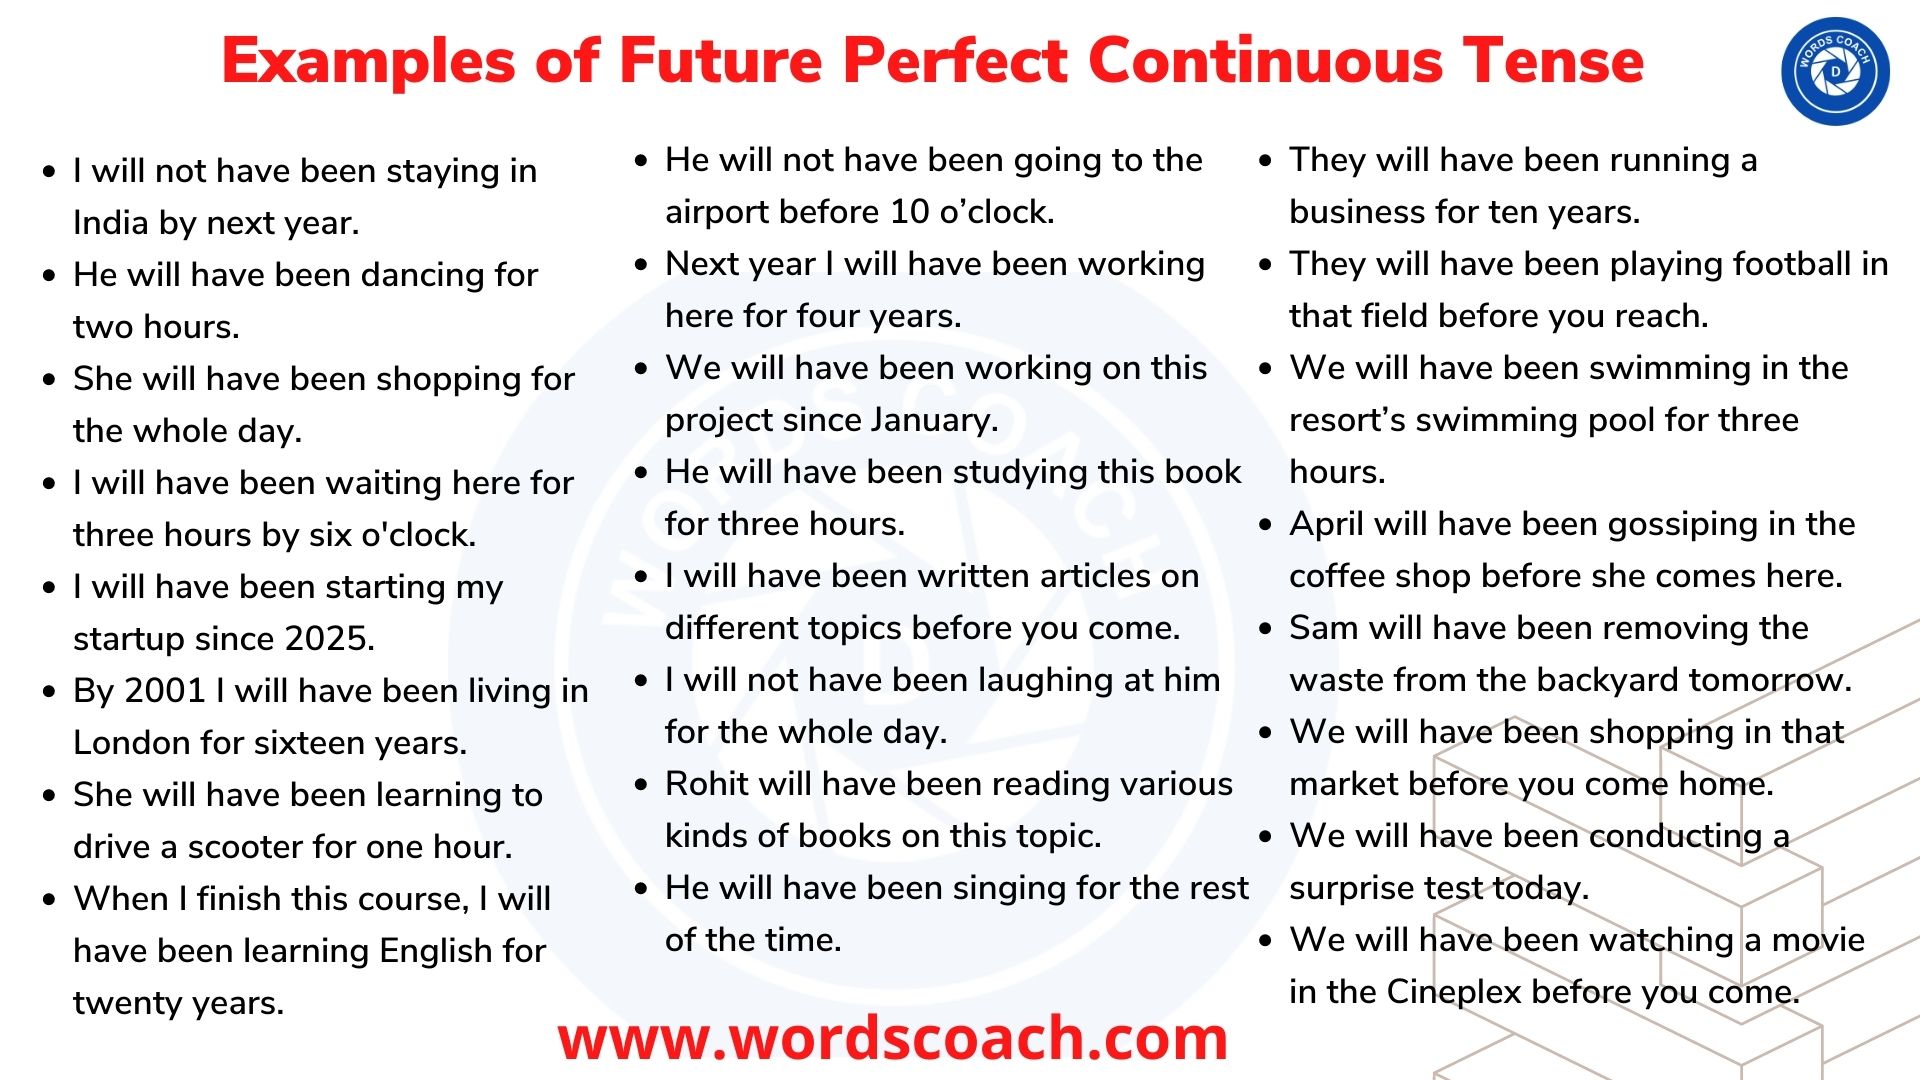 Examples of Future Perfect Continuous Tense